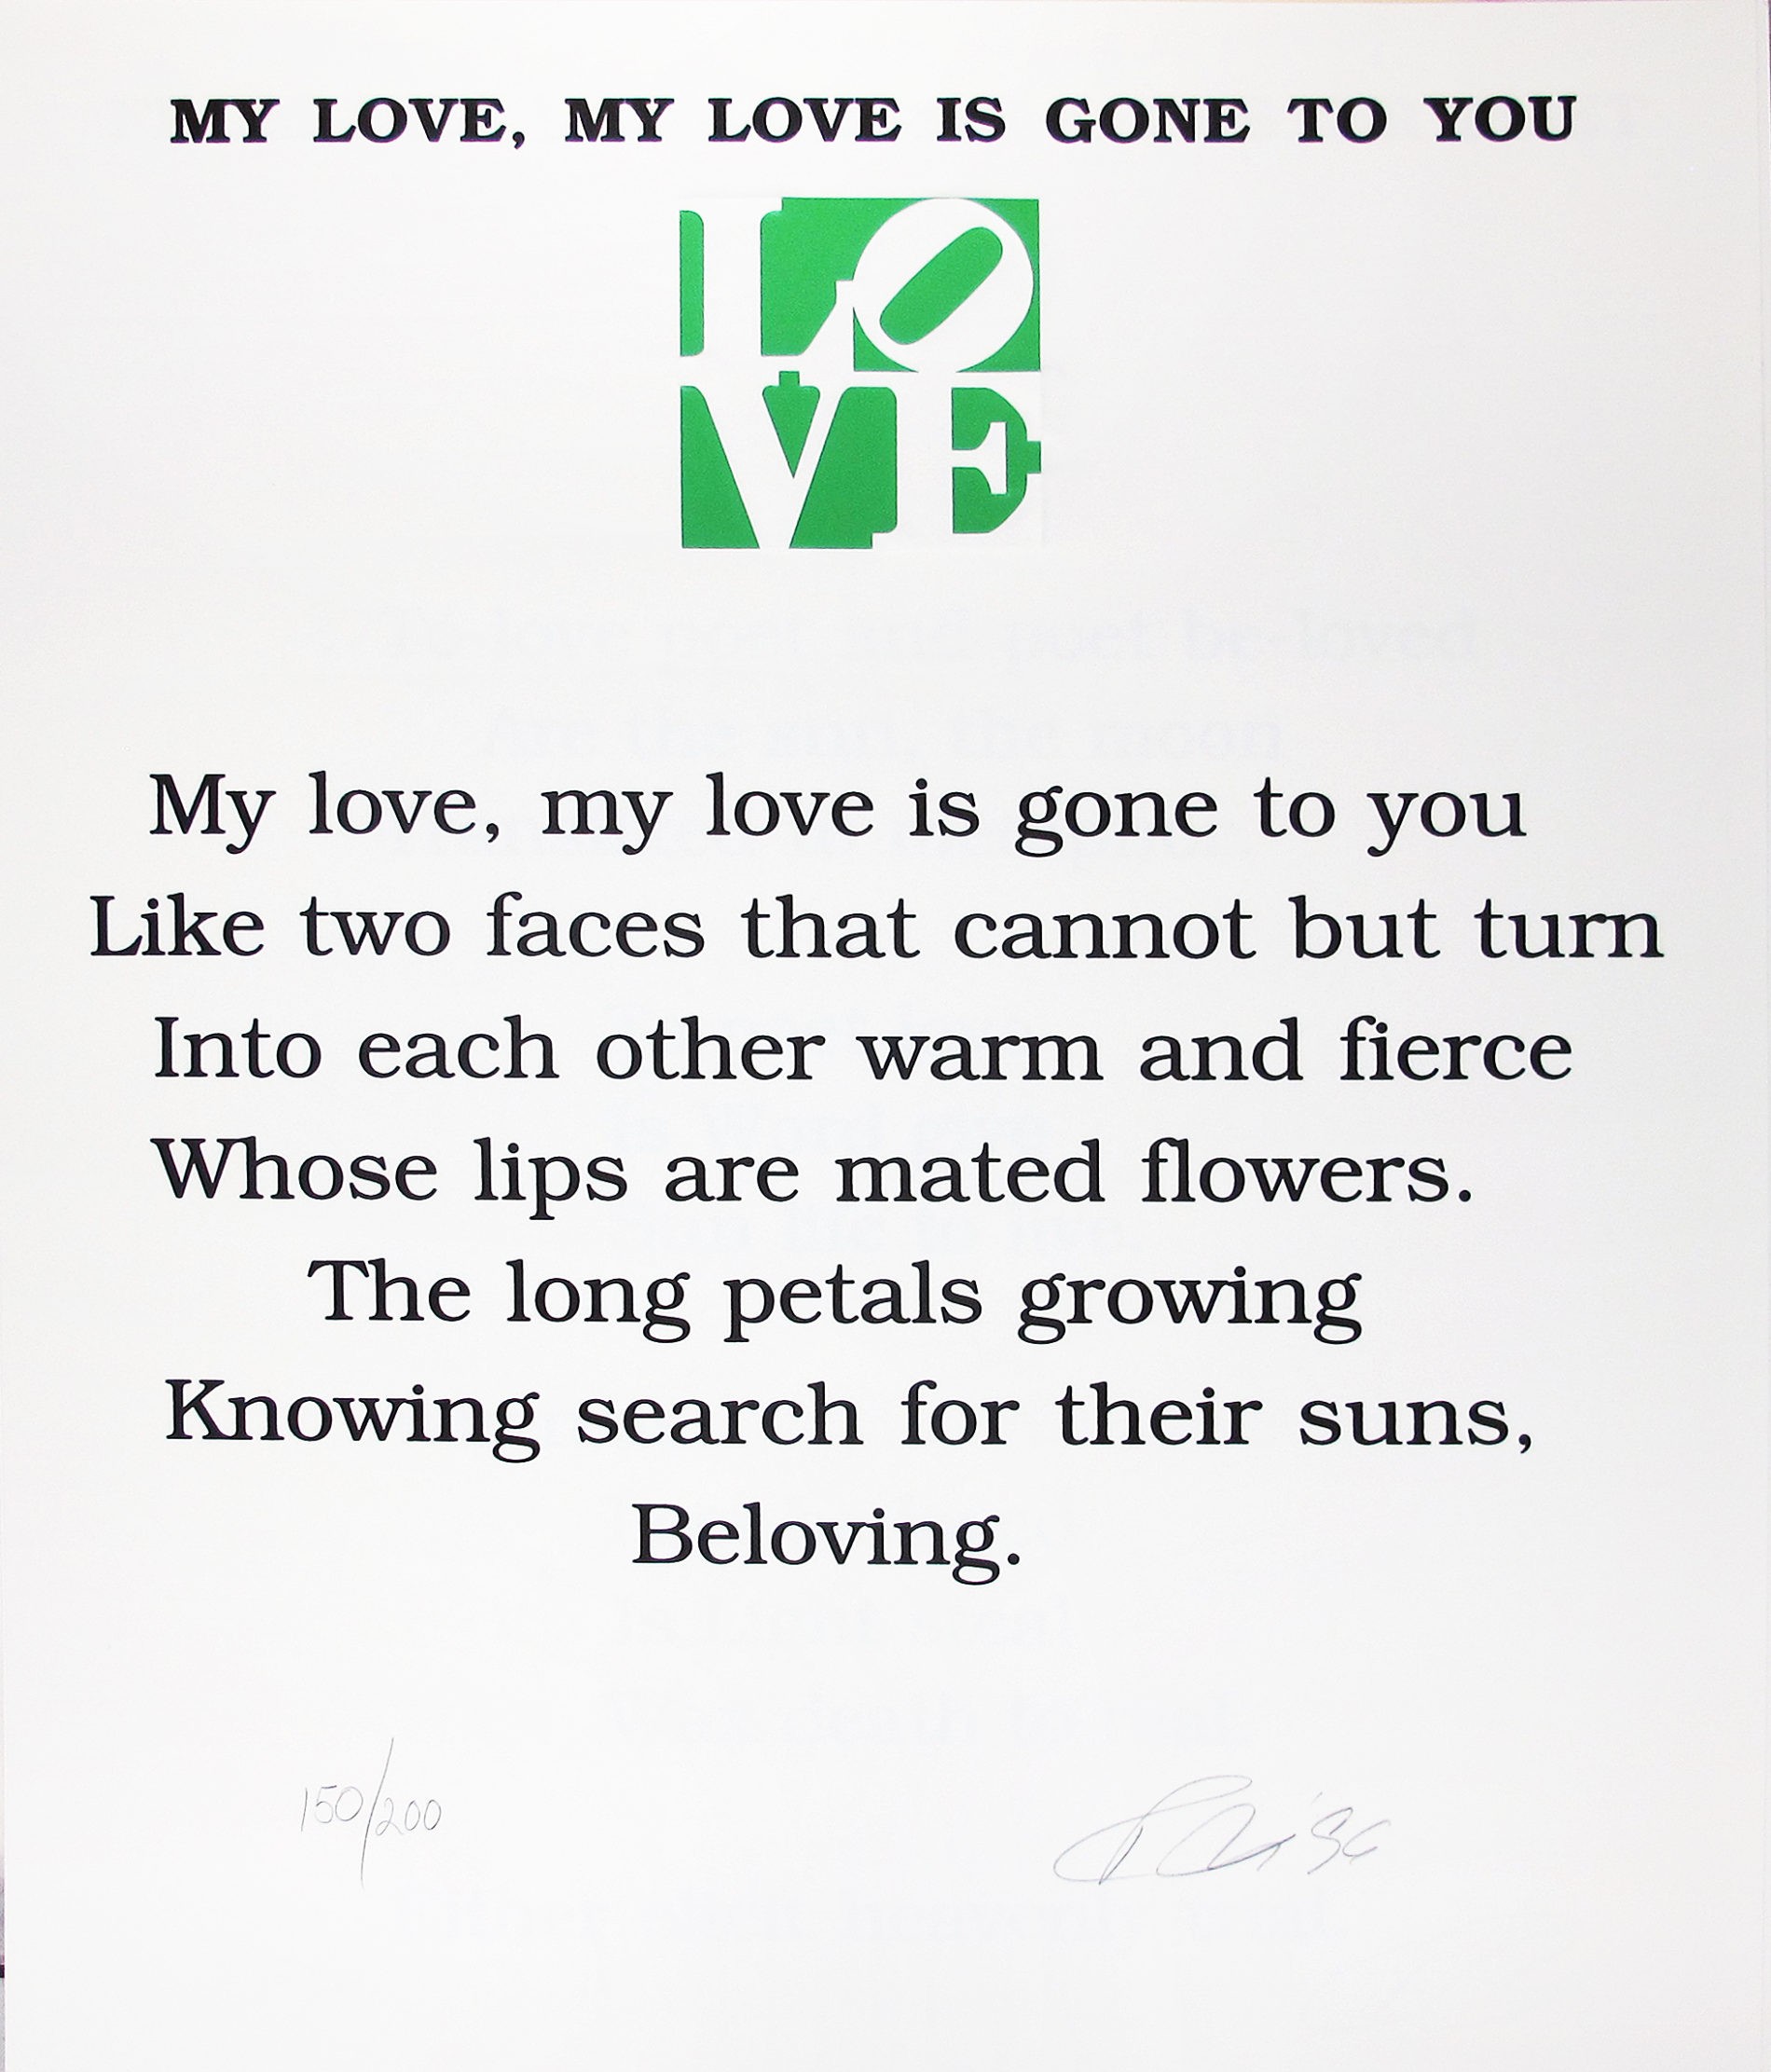 Robert Indiana | The Book of Love Poem | My Love, My Love is Gone to You | 1996 | Image of Artists' work.